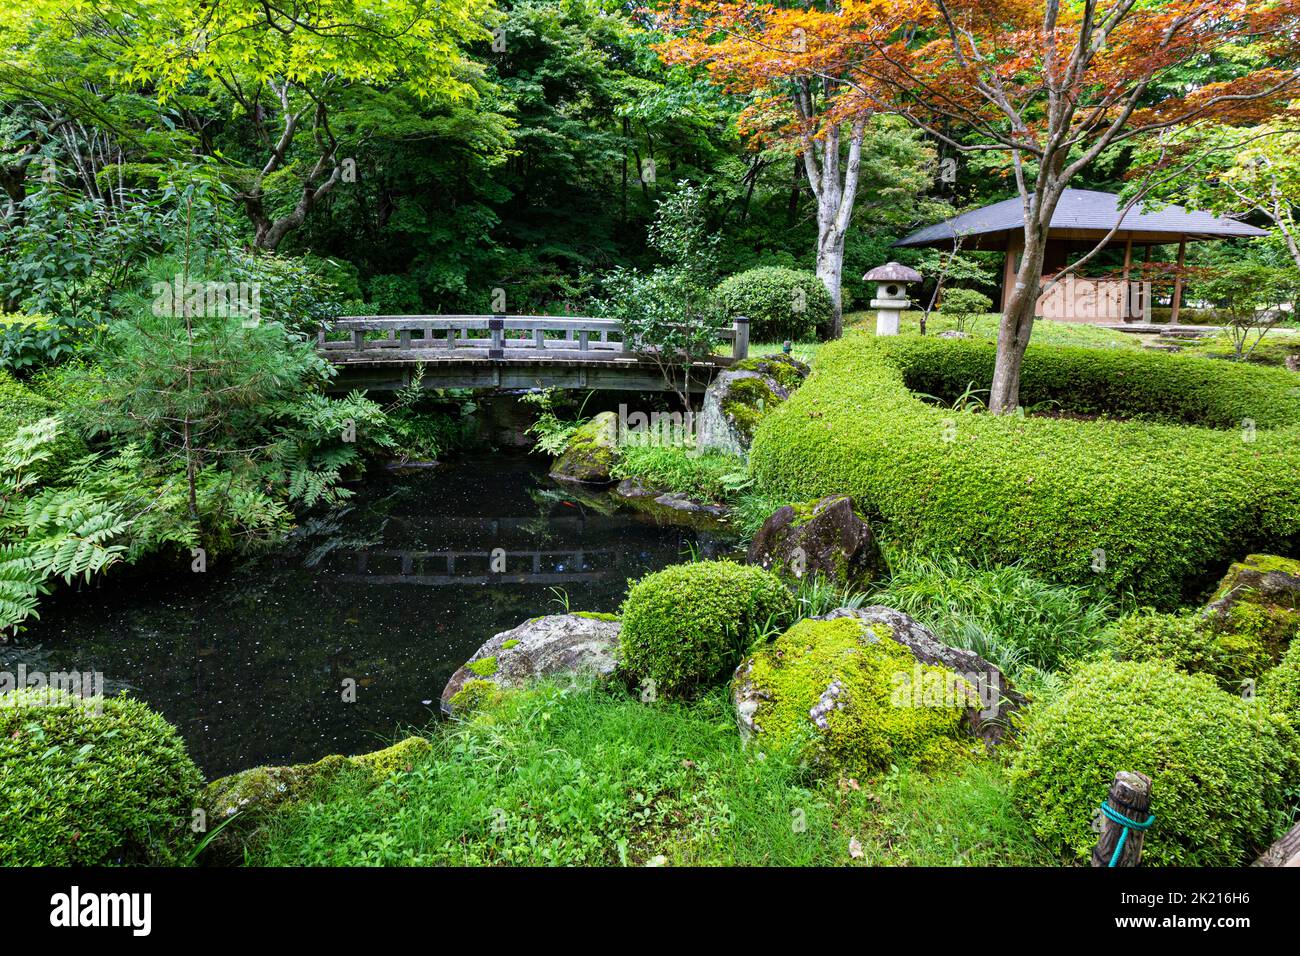 Suirakuen - This is a garden in the Japanese traditional style that reflects Sadanobu Matsudaira's philosophy of gardening. This garden is located in Stock Photo